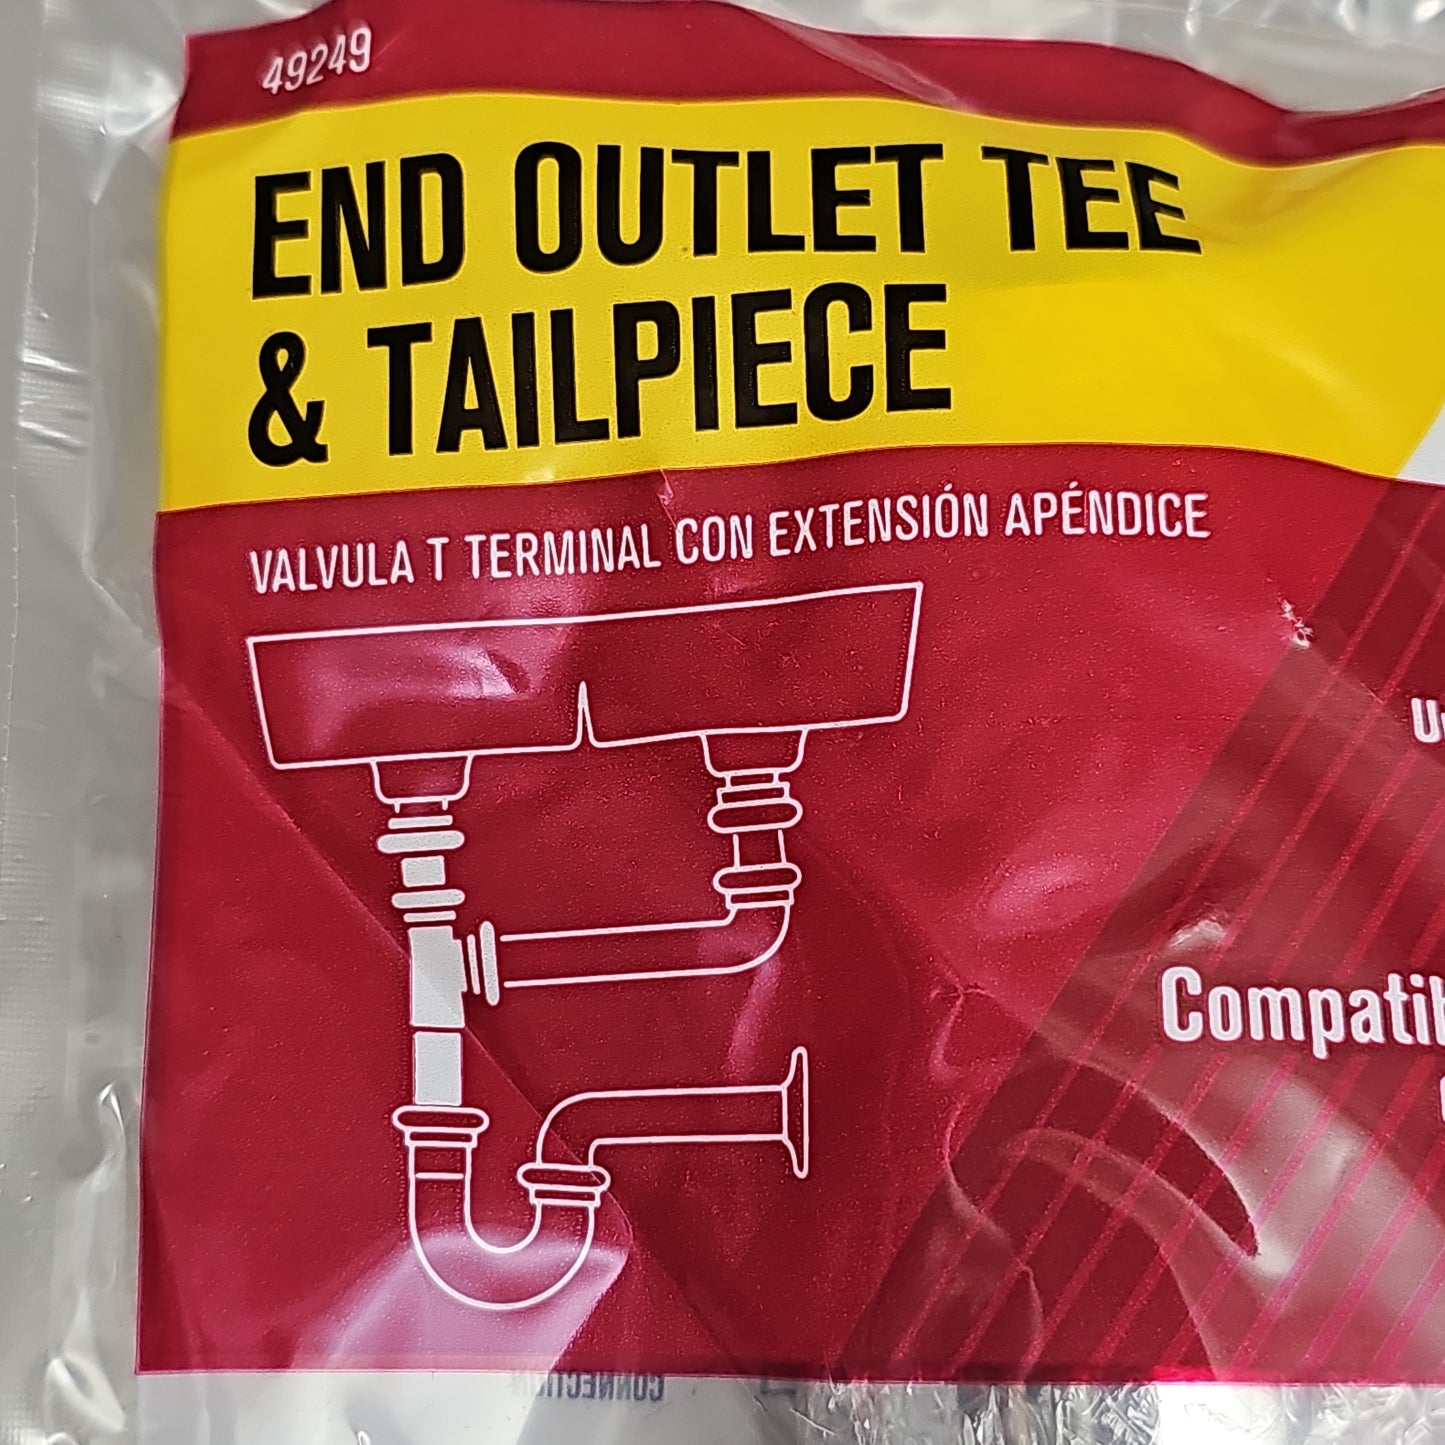 ACE End Outlet Tee & Tailpiece 5-PK 1.5" AH20217 49249 (New)